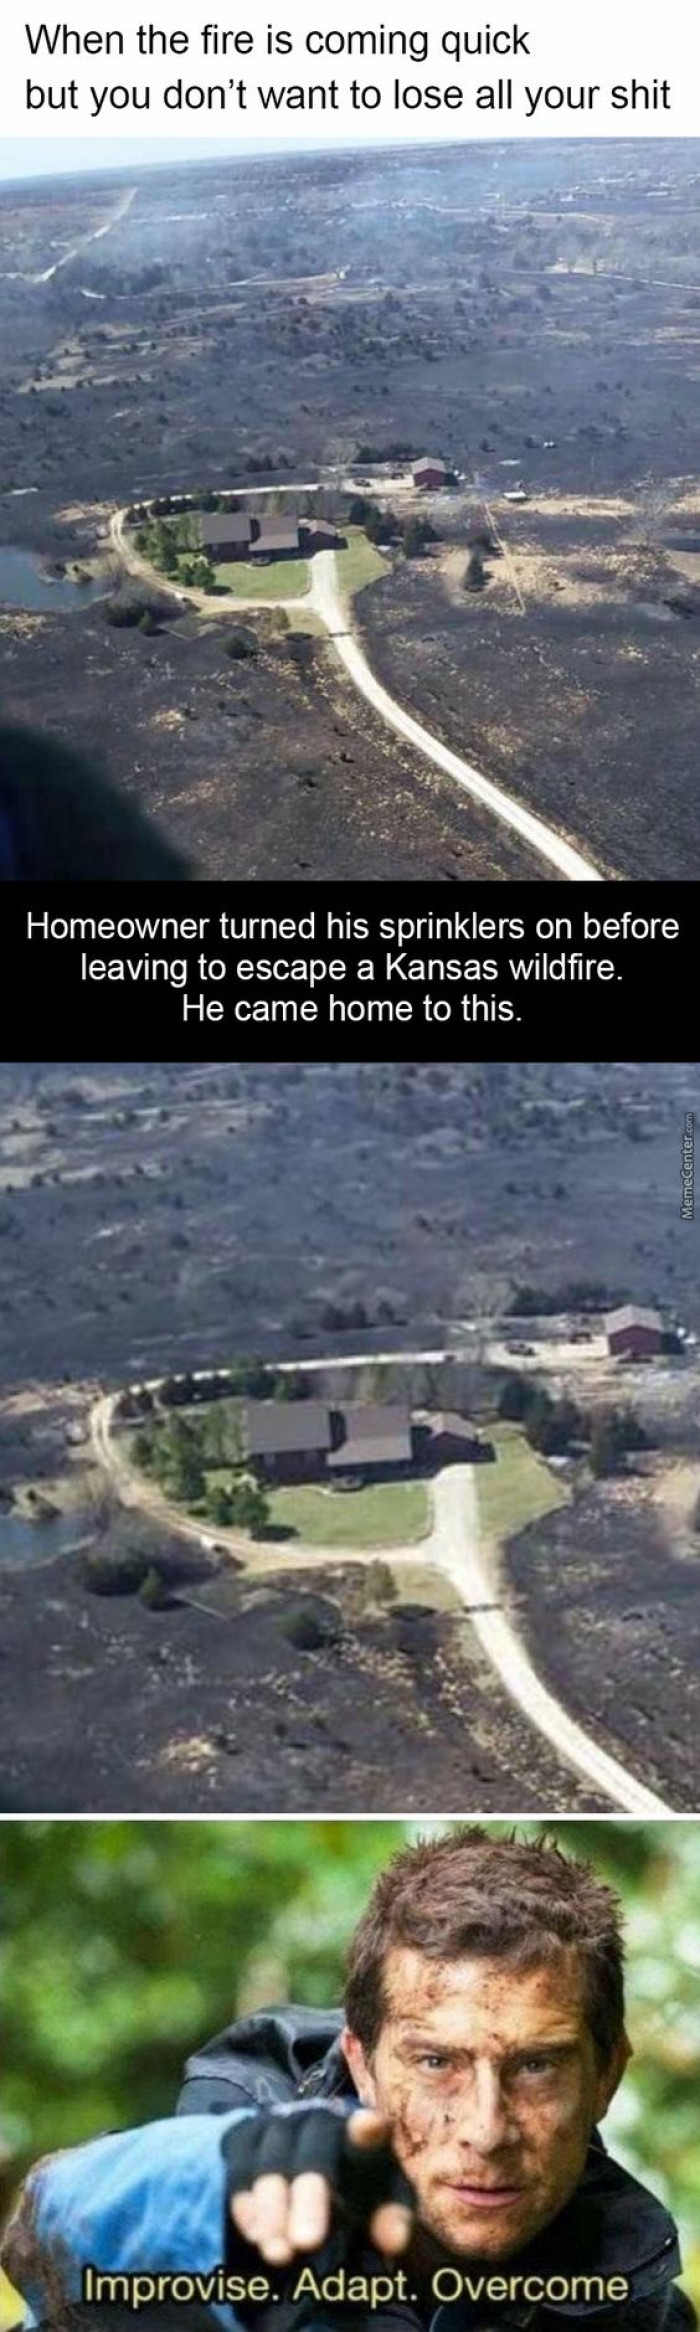 This Man Saved His Home In Genius Fashion